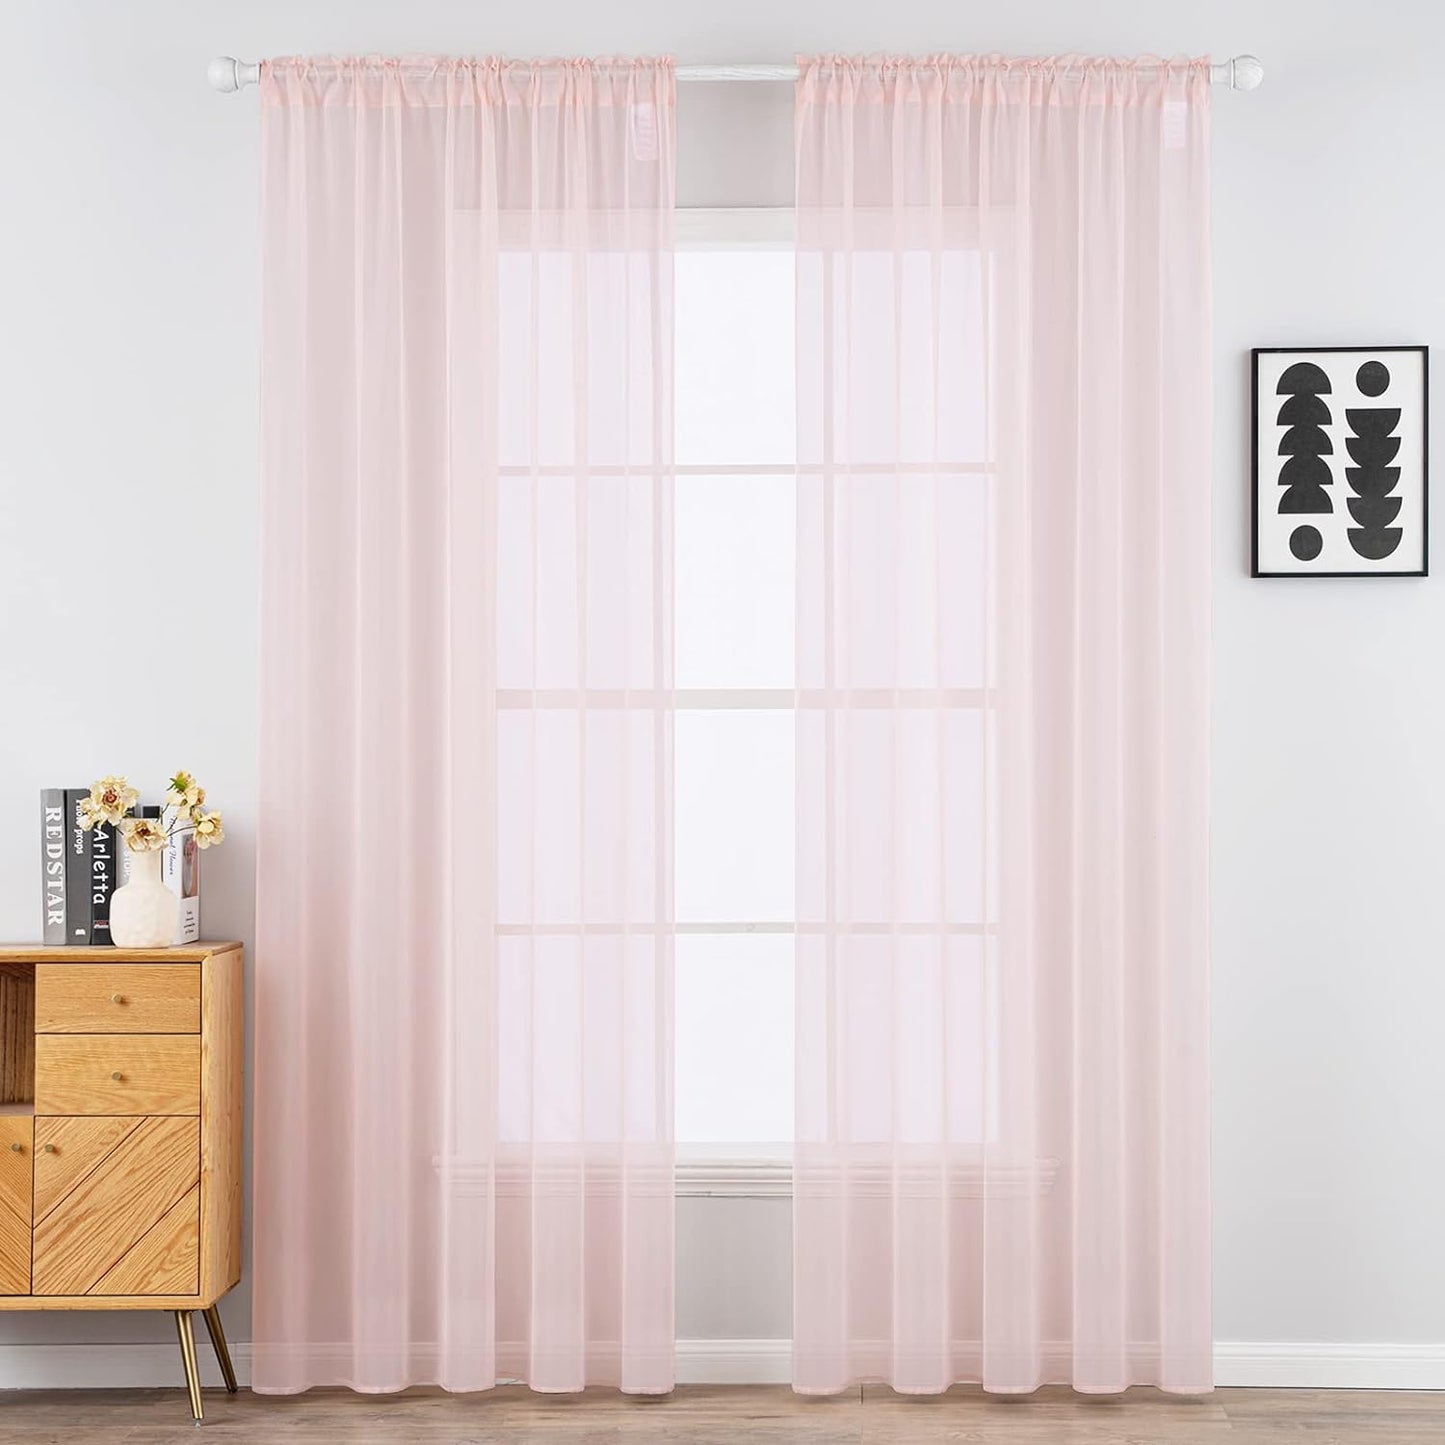 MIULEE White Sheer Curtains 96 Inches Long Window Curtains 2 Panels Solid Color Elegant Window Voile Panels/Drapes/Treatment for Bedroom Living Room (54 X 96 Inches White)  MIULEE Baby Pink 54''W X 72''L 